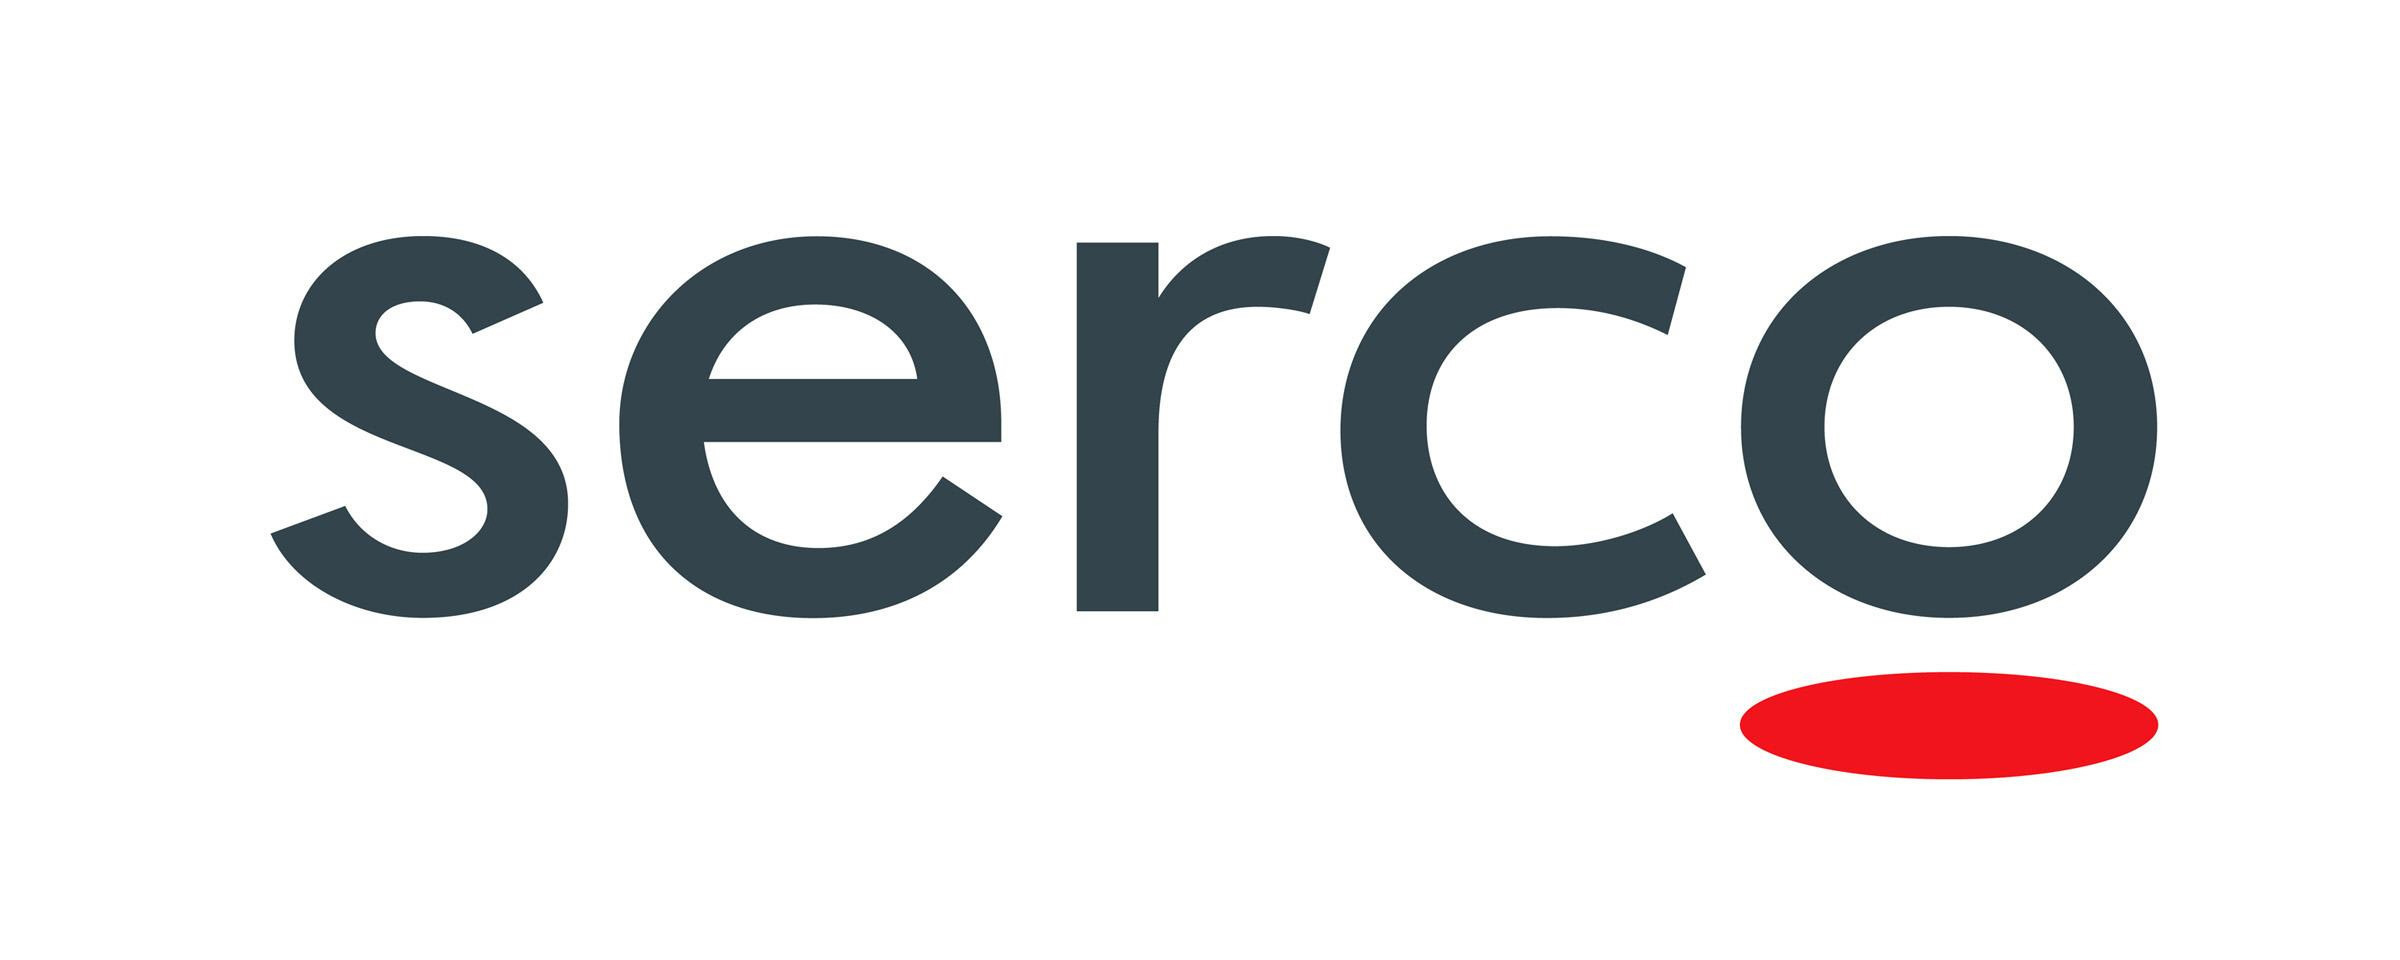 Undated file handout logo issued by Serco. Outsourcing giant Serco has said it expects profits to exceed expectations in 2020 as a result of the uptick in work since the global pandemic.